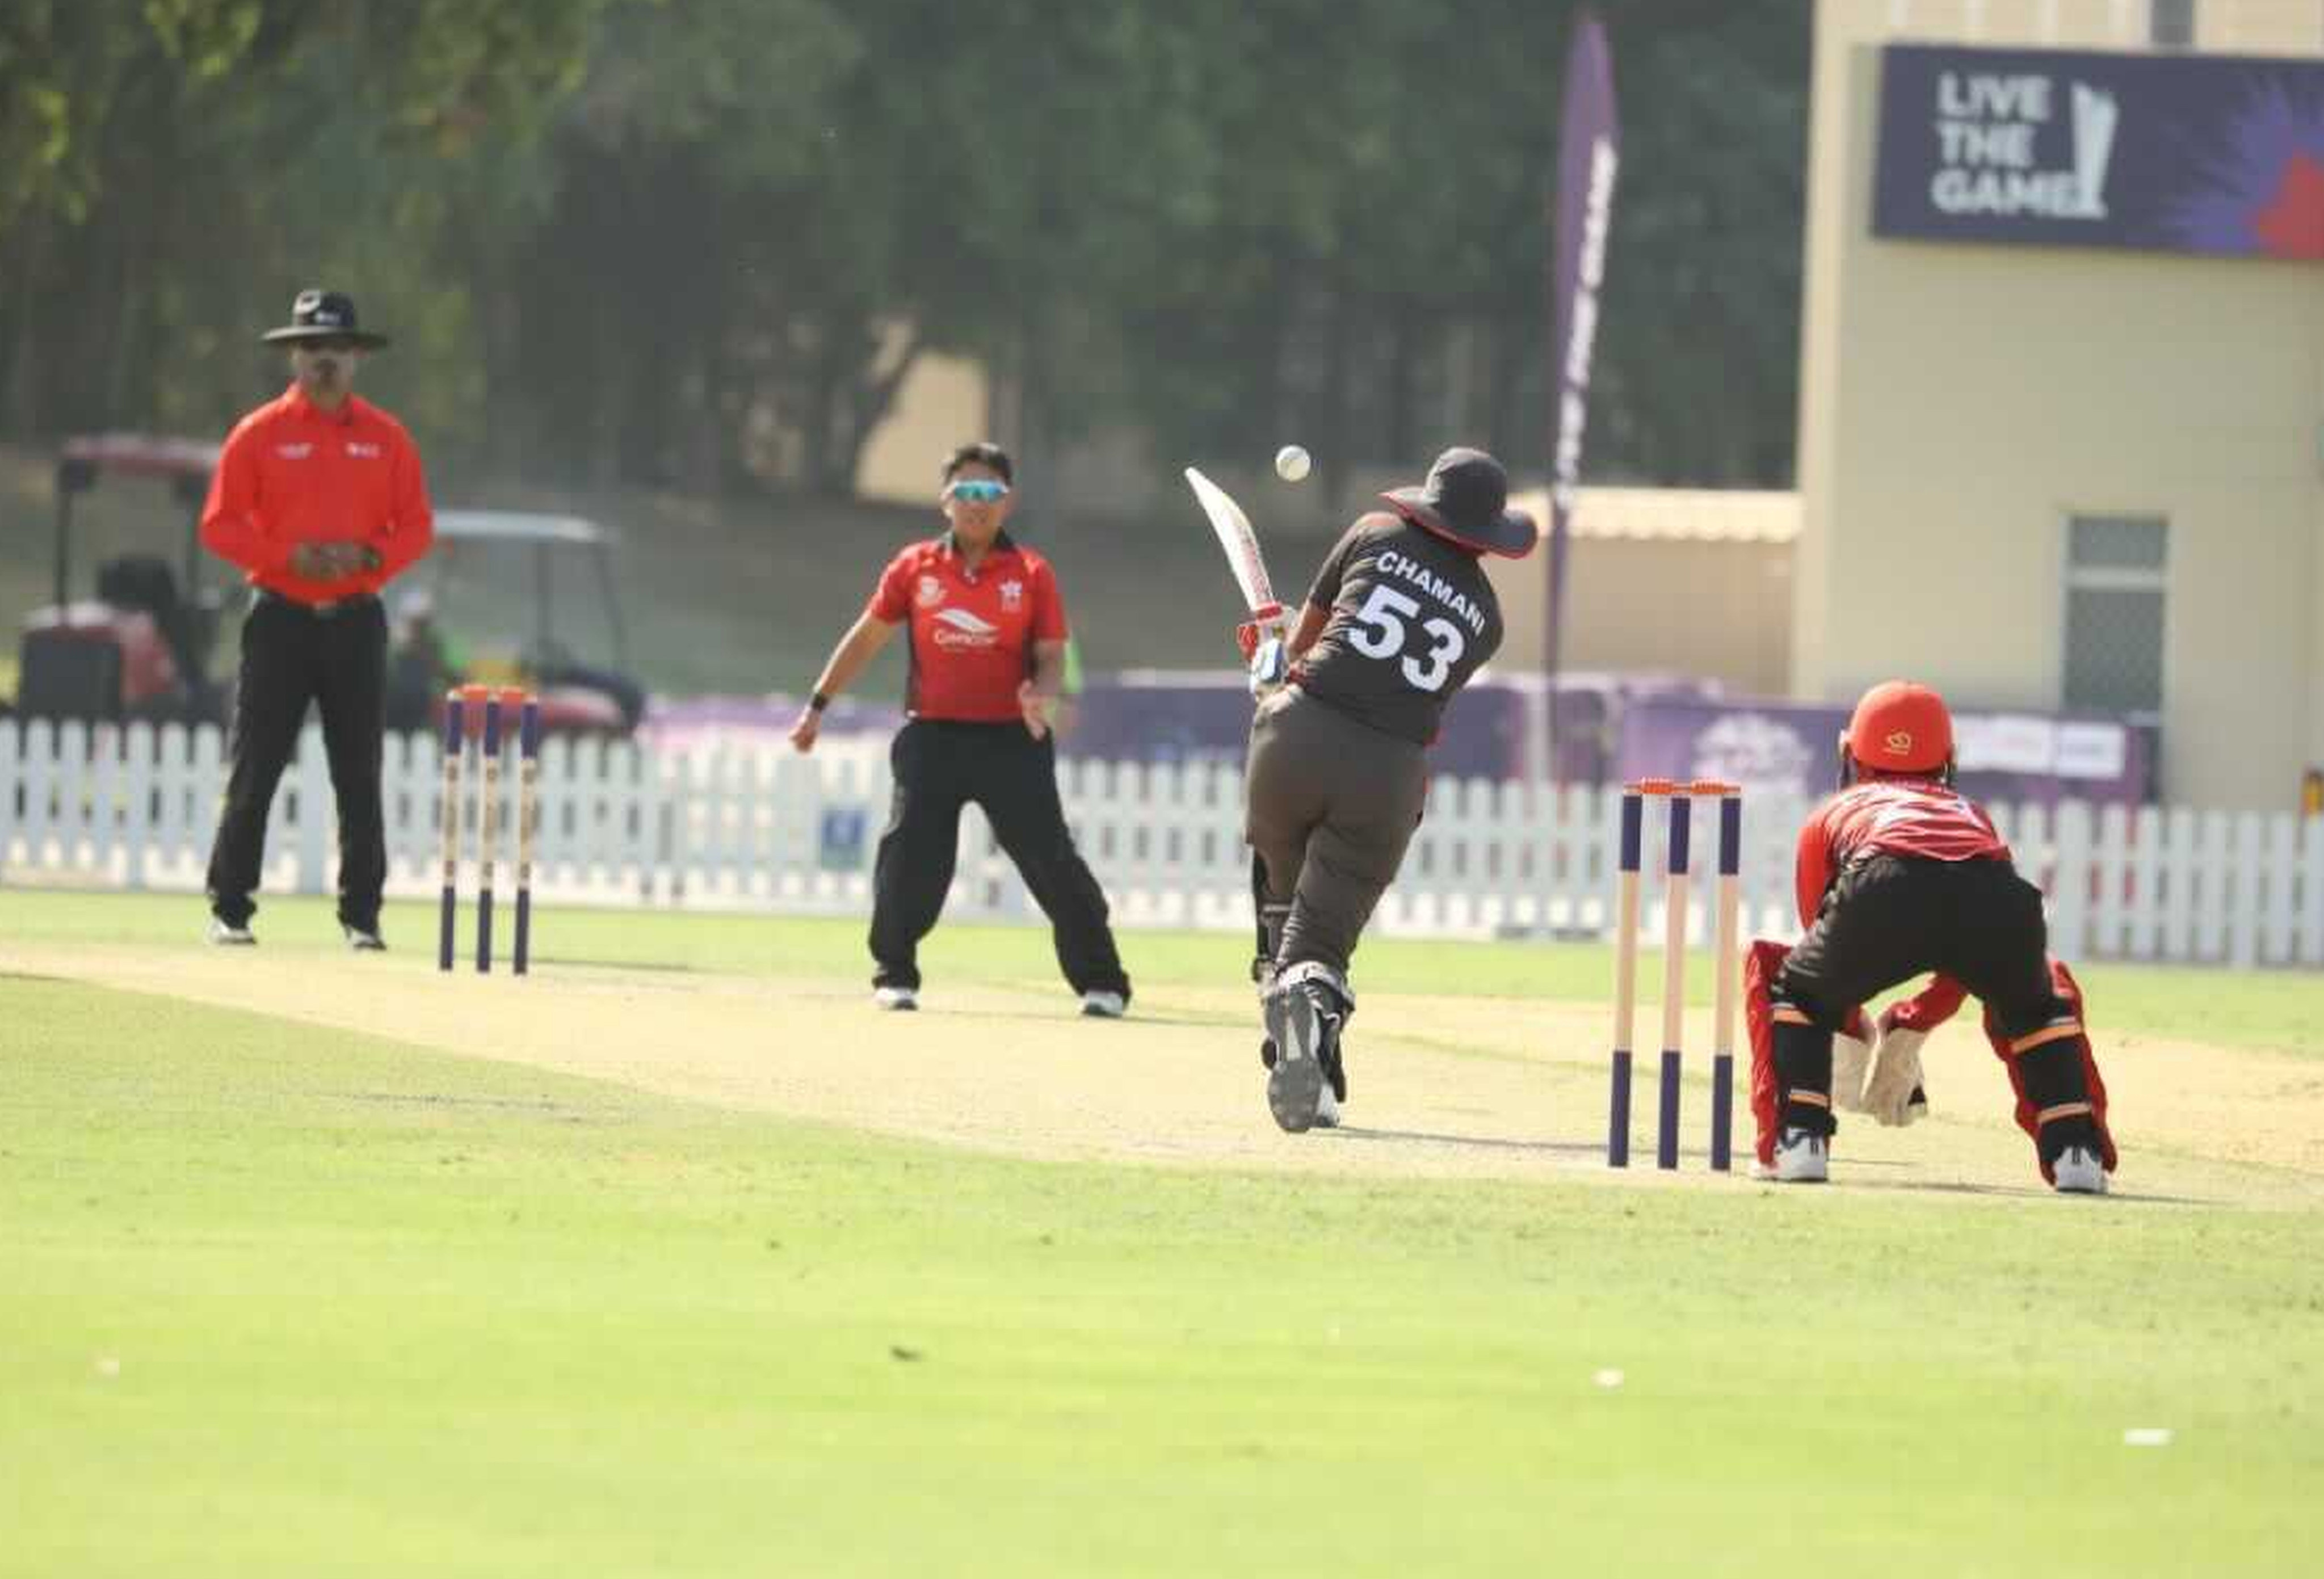 Hong Kong v UAE at ICC Academy in Dubai for Women’s T20 World Cup Asian regional qualifier. UAE batsman Chamani Seneviratna drives a ball back towards Hong Kong’s Betty Chan during at the ICC Academy grounds in Dubai. Photo: ICC